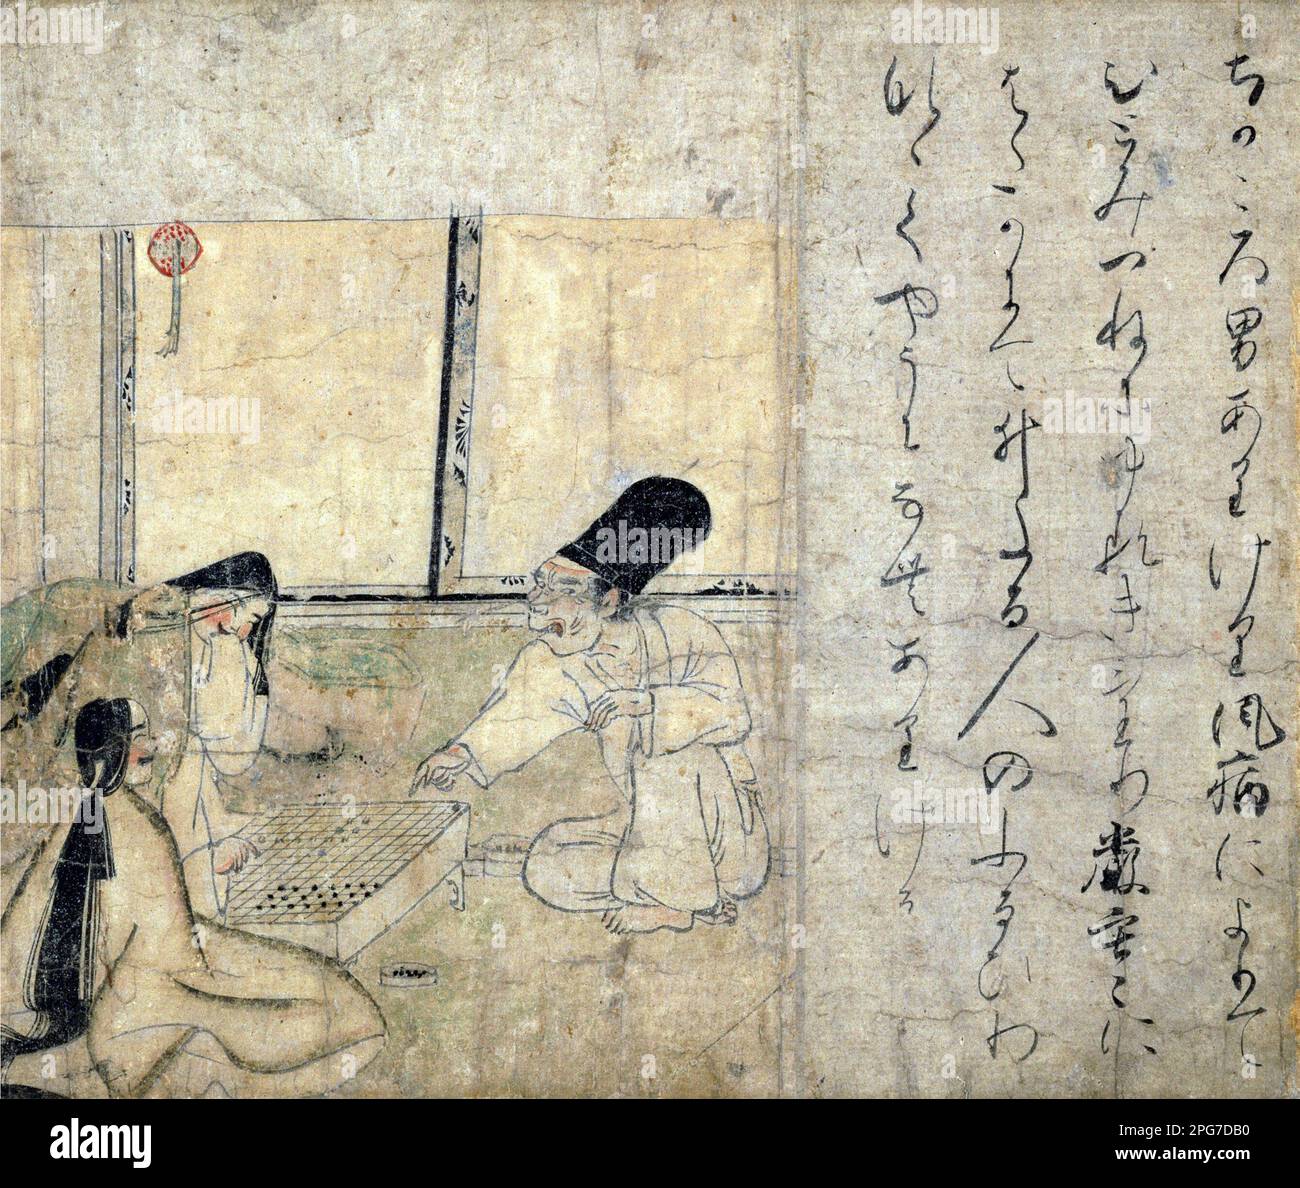 Japan: A man suffering from uvula disease (infection of the soft palate) playing a game of Go with a woman as another woman watches. Handscroll painting from the Yamai no Soshi (Yamai Zoshi) or 'diseases scroll', mid-12th century CE.  The Shihon choshoku yamai no soshi ('Diseases and Deformities', 紙本著色病草紙) is a late Heian (12th century) hand scroll (emakimono) consisting of colour paintings on paper that has, at some time, been cut into ten separate sections. They are preserved in the Kyoto National Museum and are listed as a National Treasure of Japan. Stock Photo